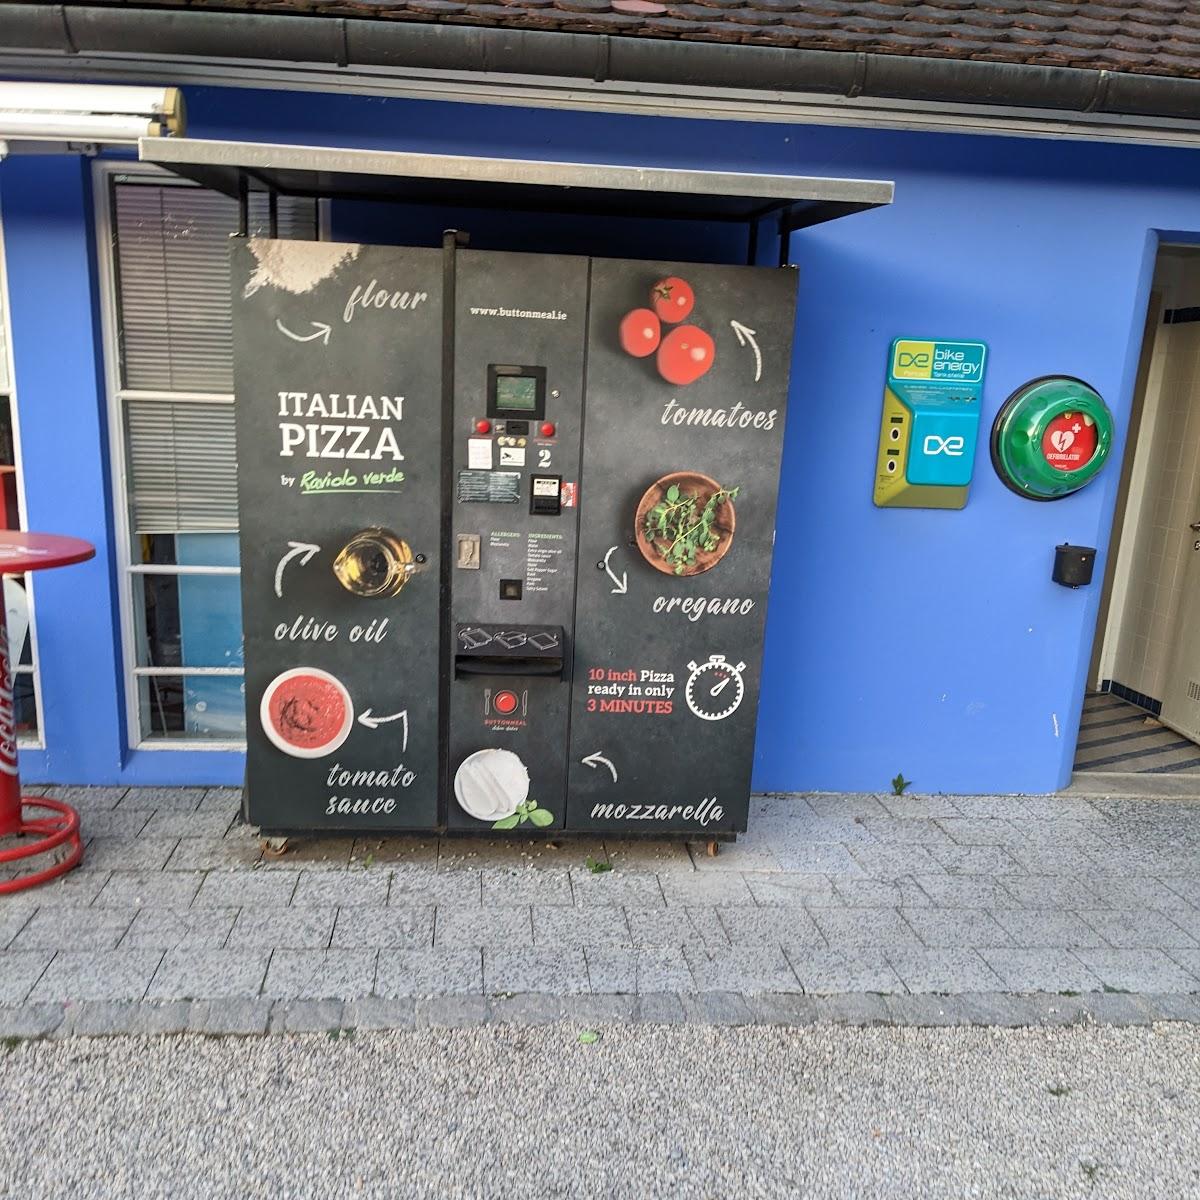 Restaurant "Pizza Automat Utting" in Utting am Ammersee